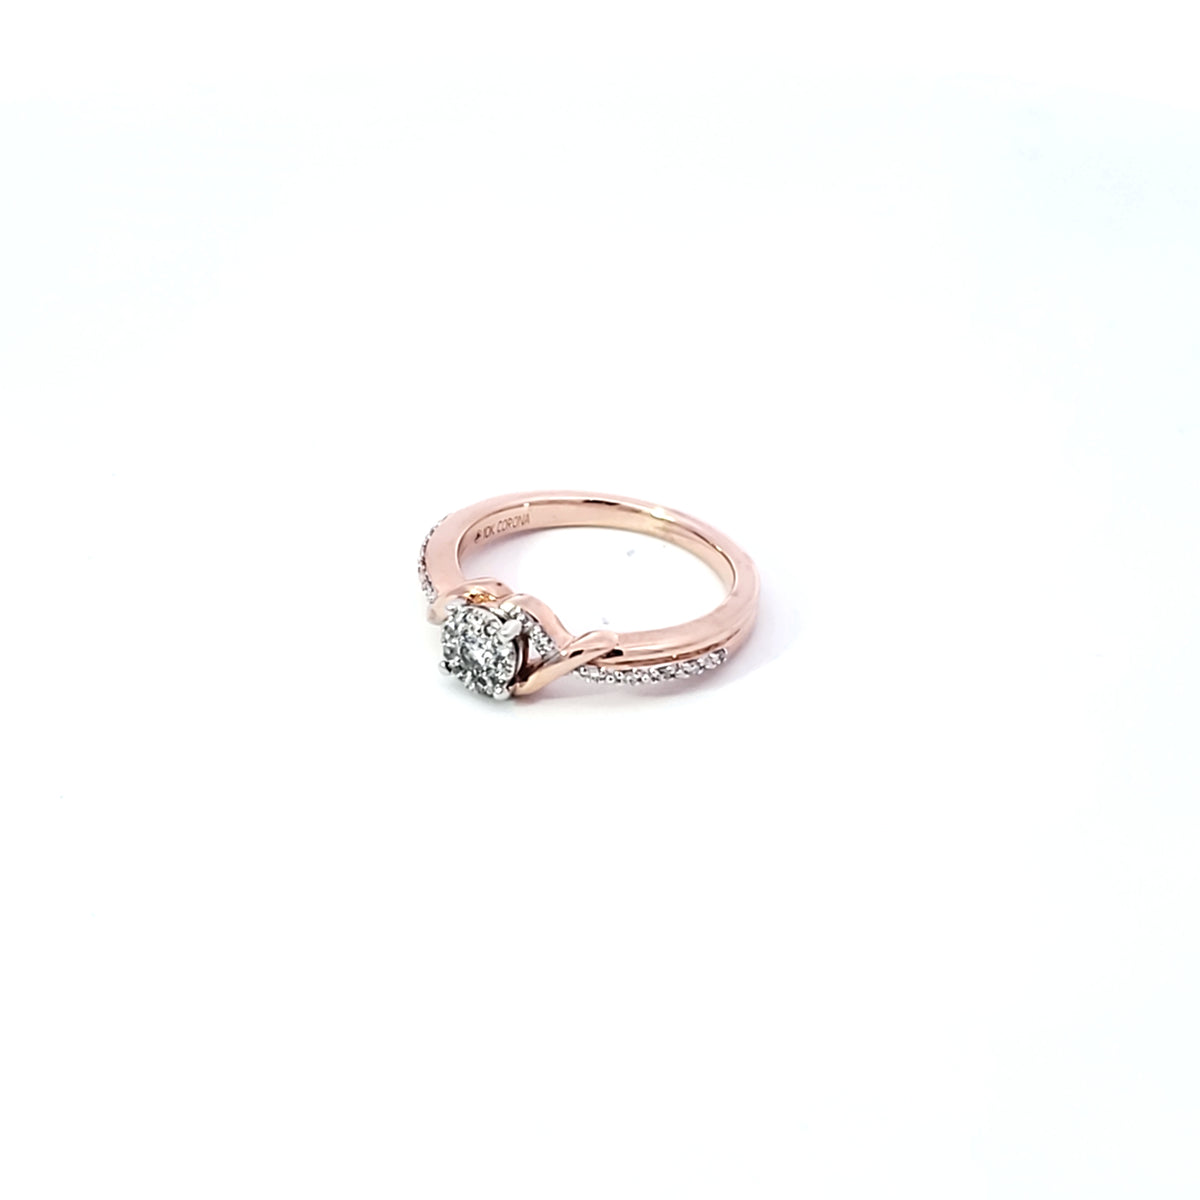 10K White and Rose Gold 0.19 cttw Diamond Ring